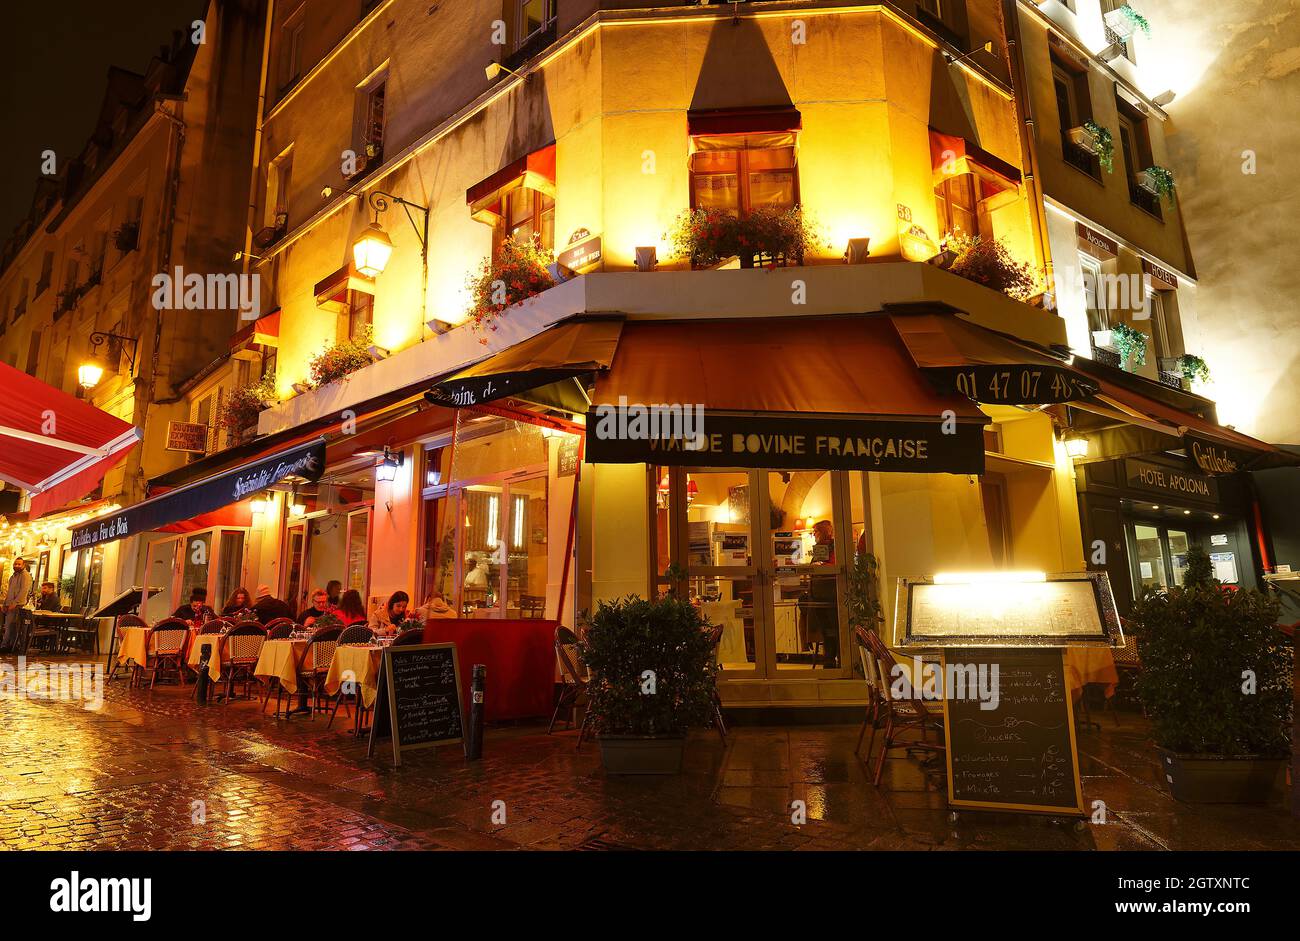 The French traditional restaurant Viande bovine francaise located in ...